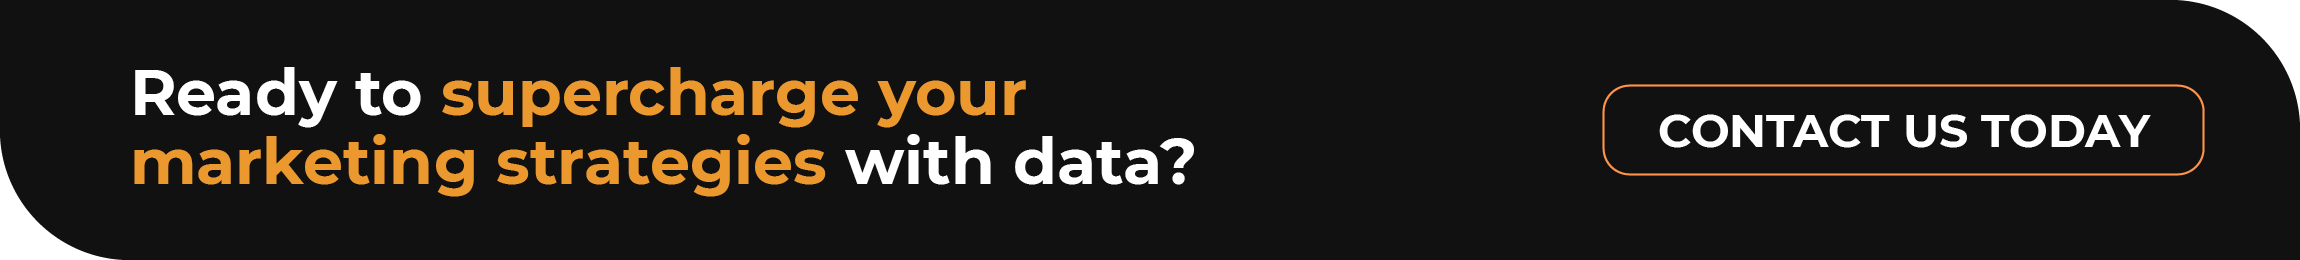 Ready to supercharge your marketing strategies with data? Click on this link to contact AccuData today.